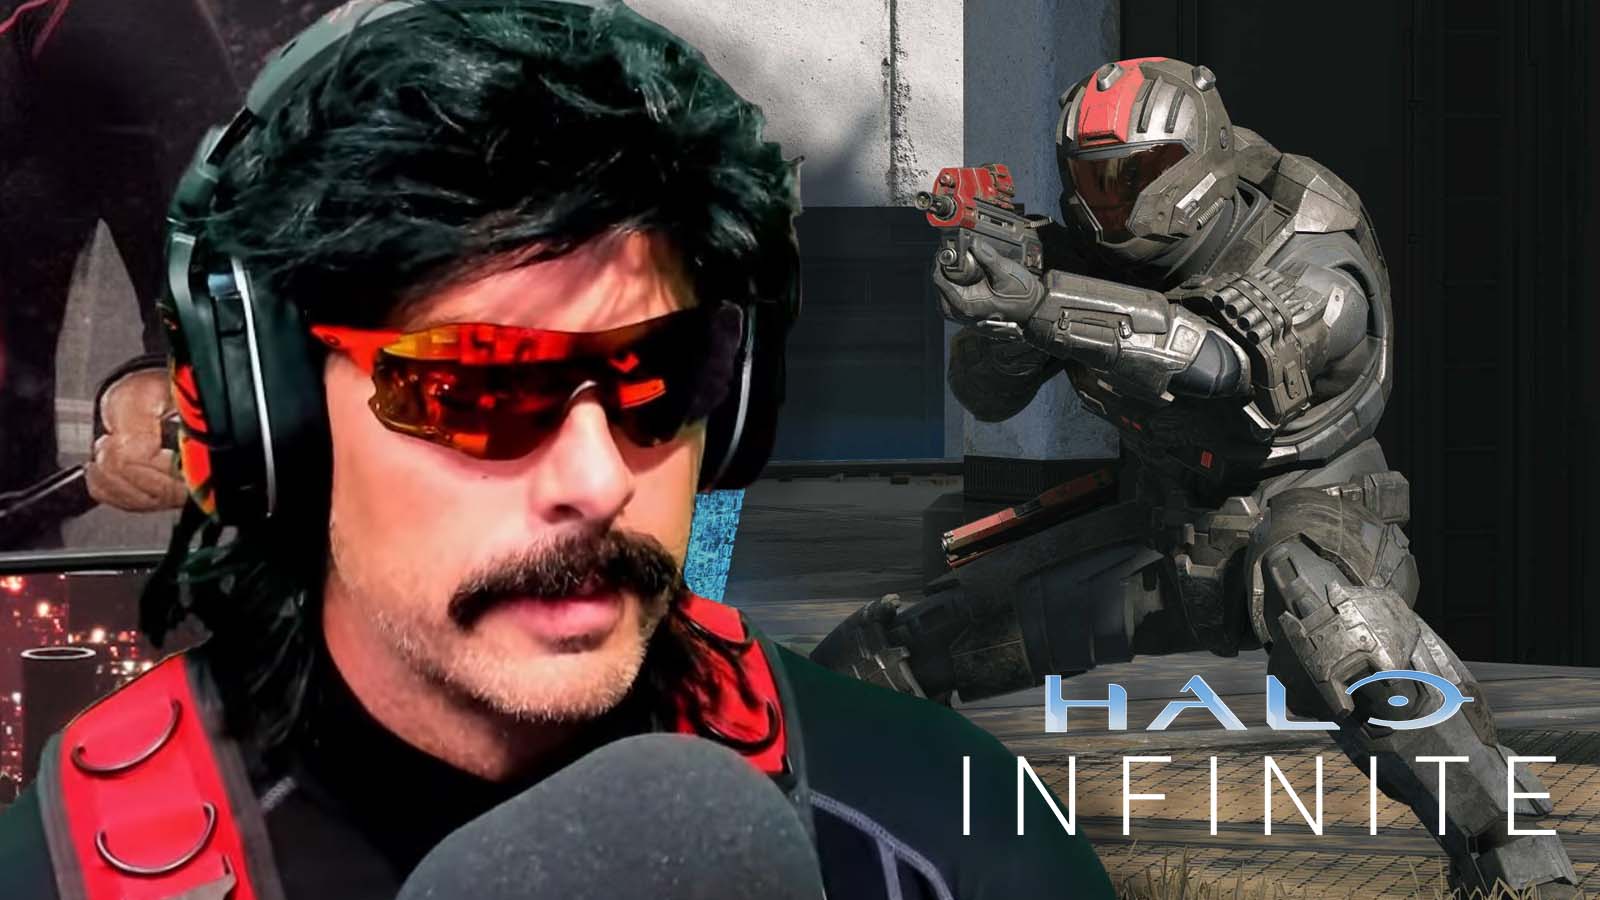 Dr Disrespect claims Halo Infinite feels "empty" without one key feature